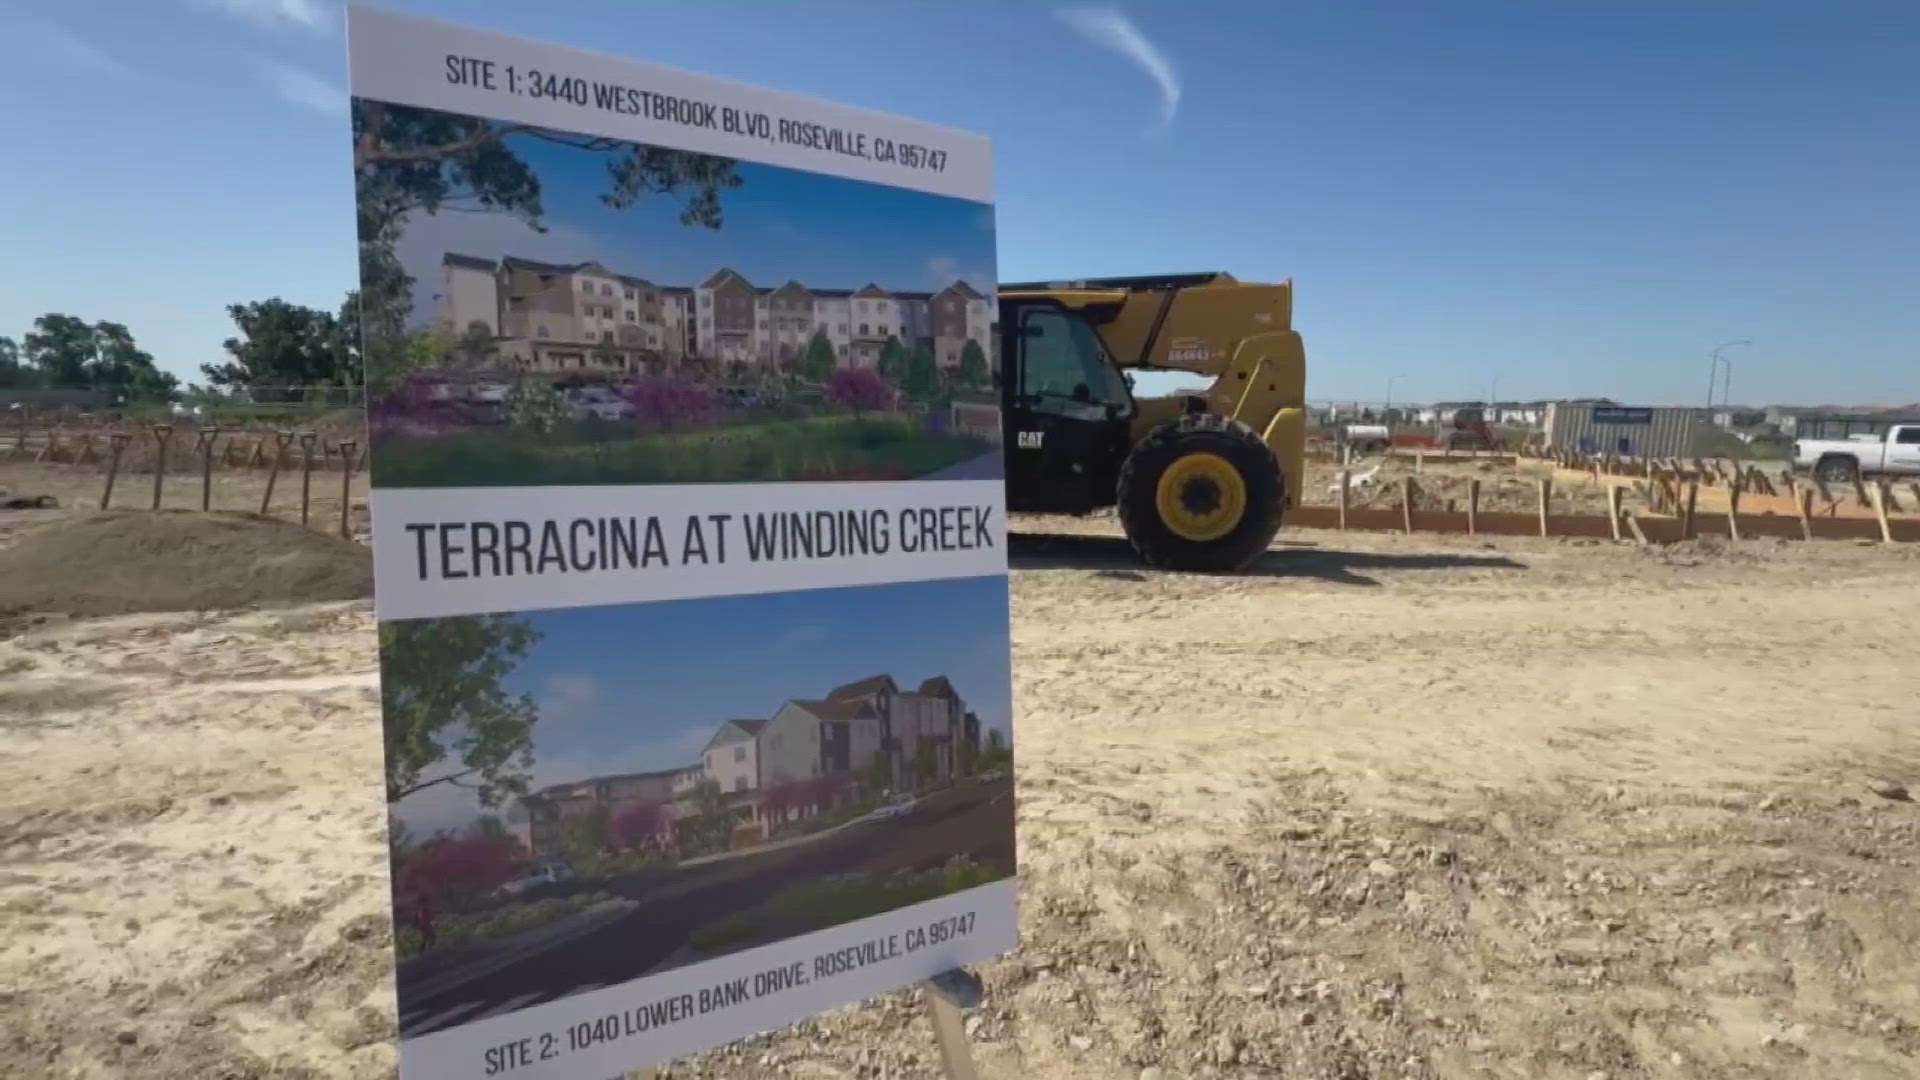 Construction is underway for affordable apartments near Roseville